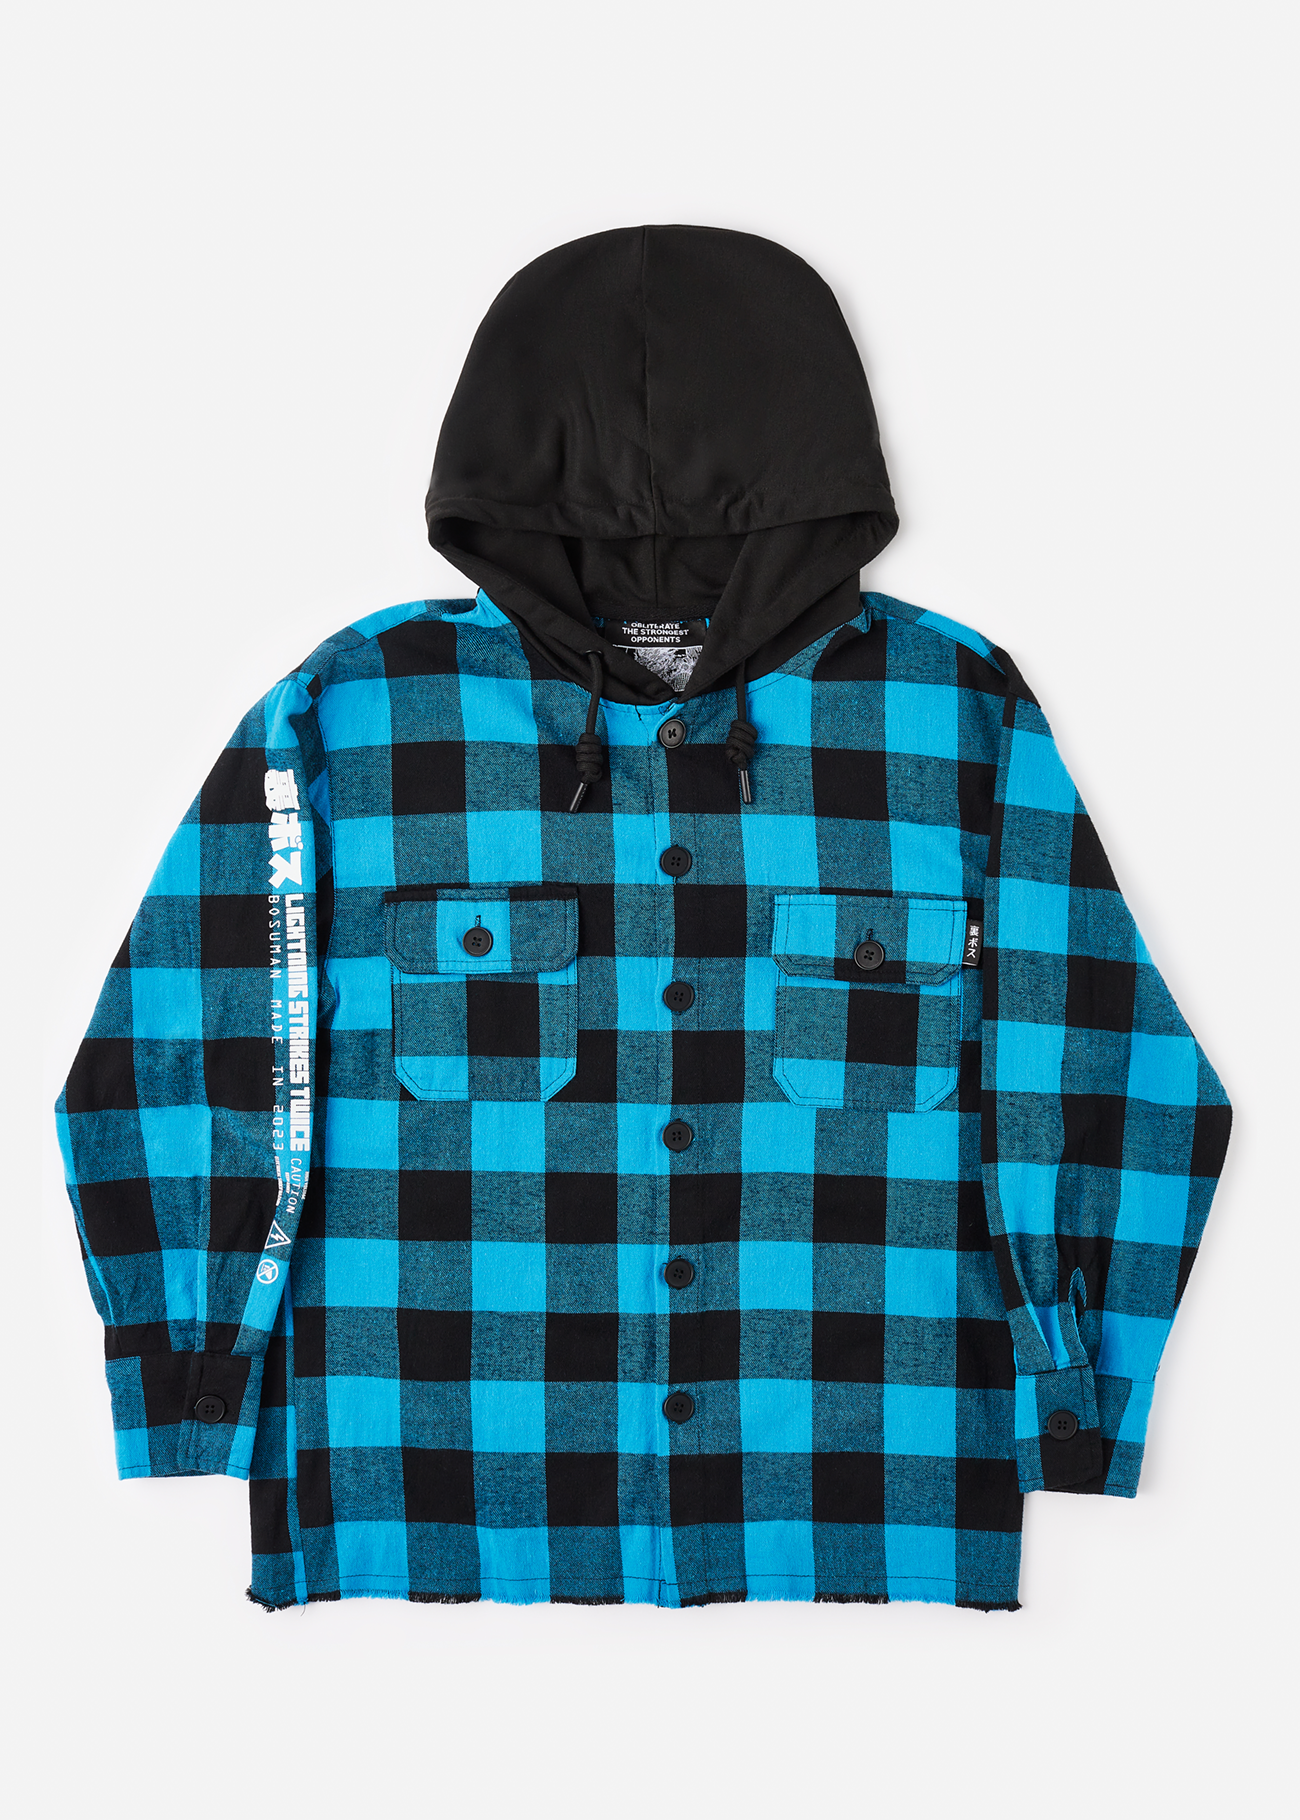 A premium blue flannel front facing photograph with hoodie and screen print depicting the Kirin on its back, Japanese mythology figure on an anime hoodie